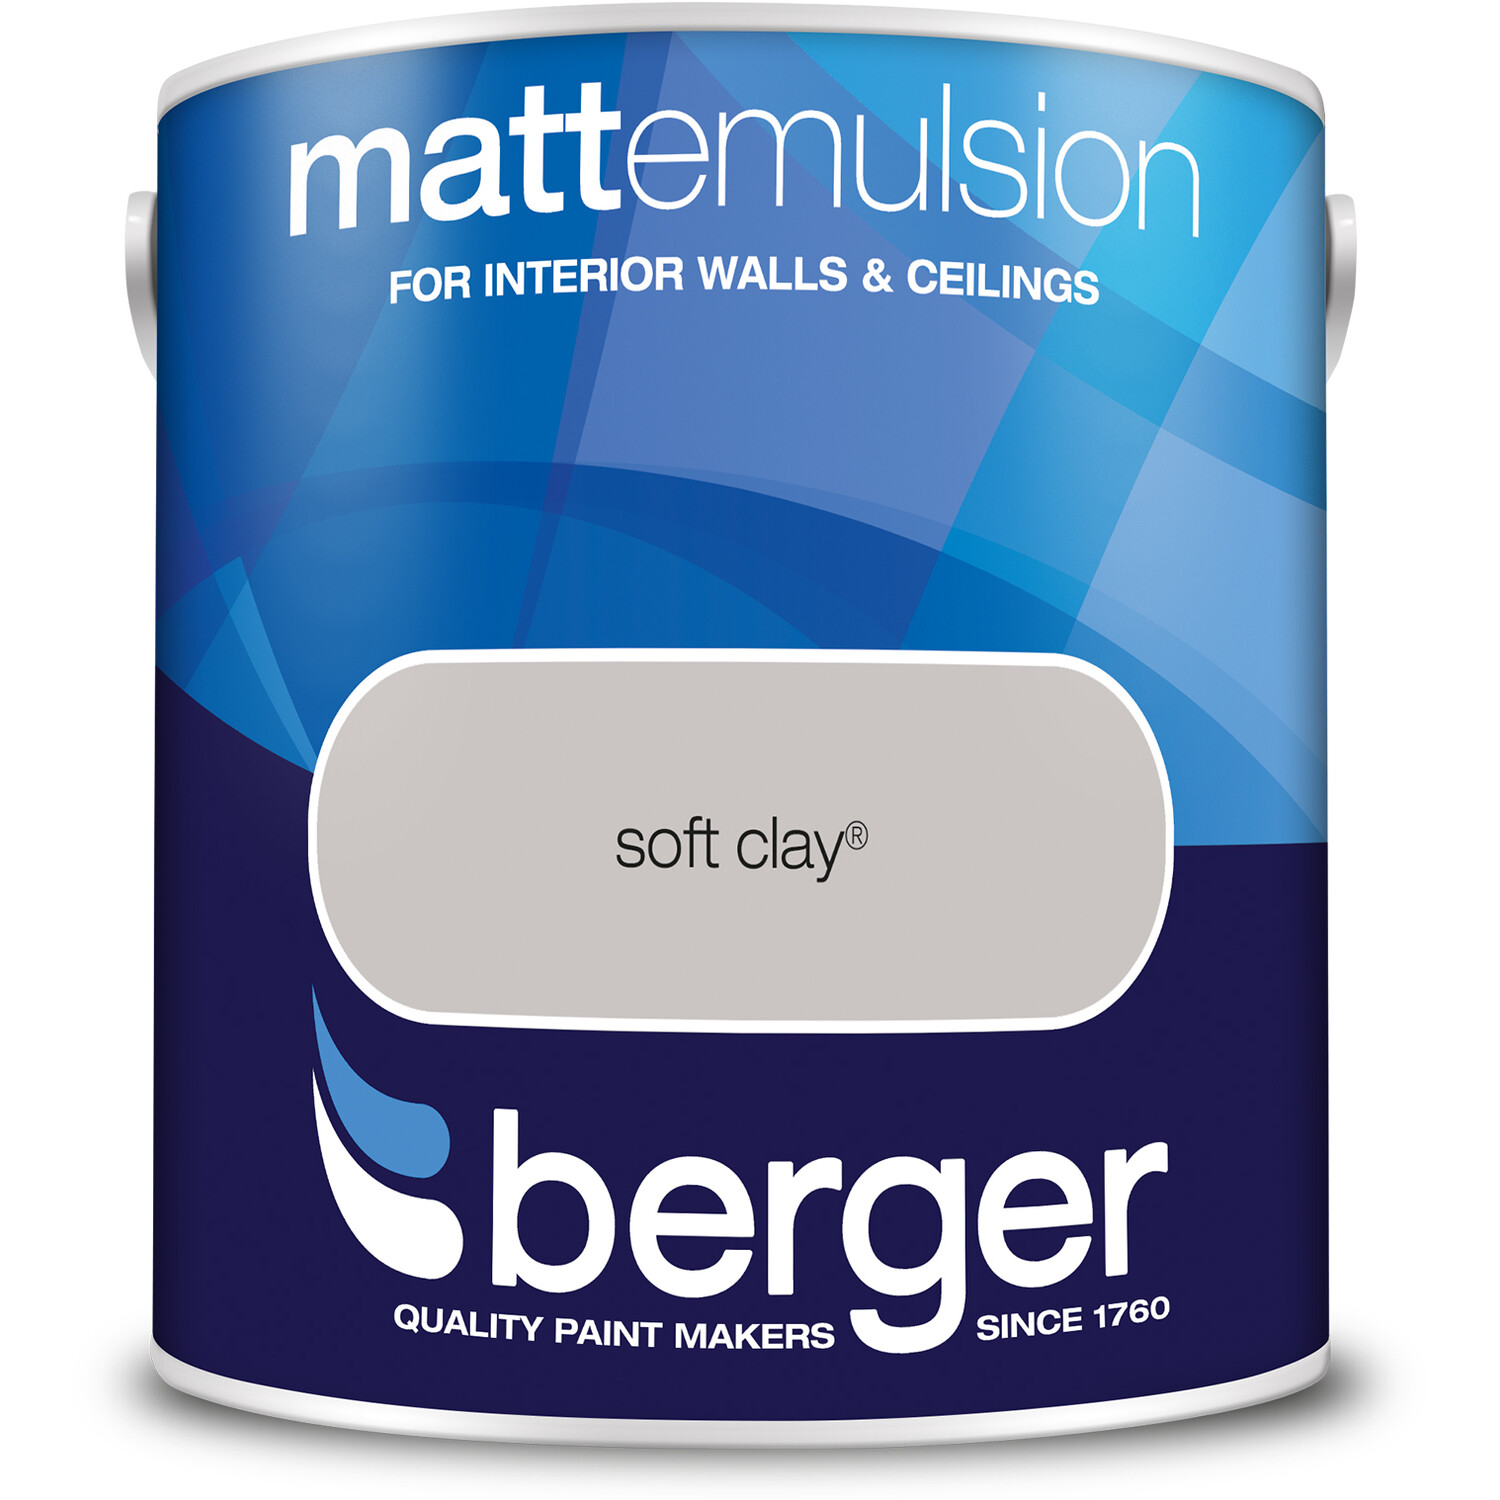 Berger Walls and Ceilings Soft Clay Matt Emulsion Paint 2.5L Image 2